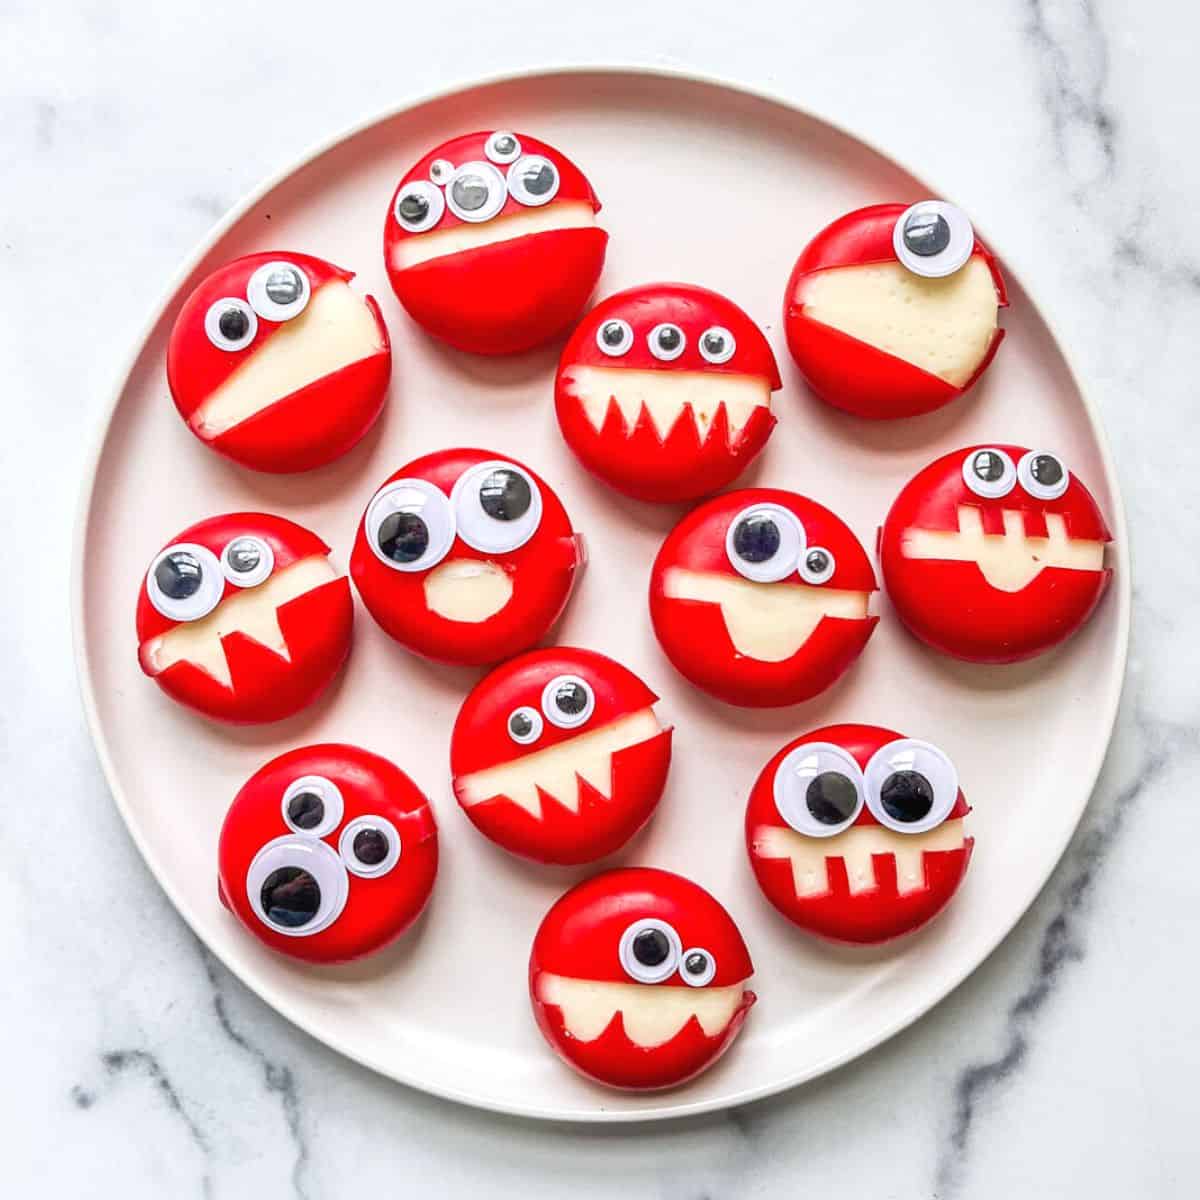 Babybel cheese monsters for Halloween on a plate.